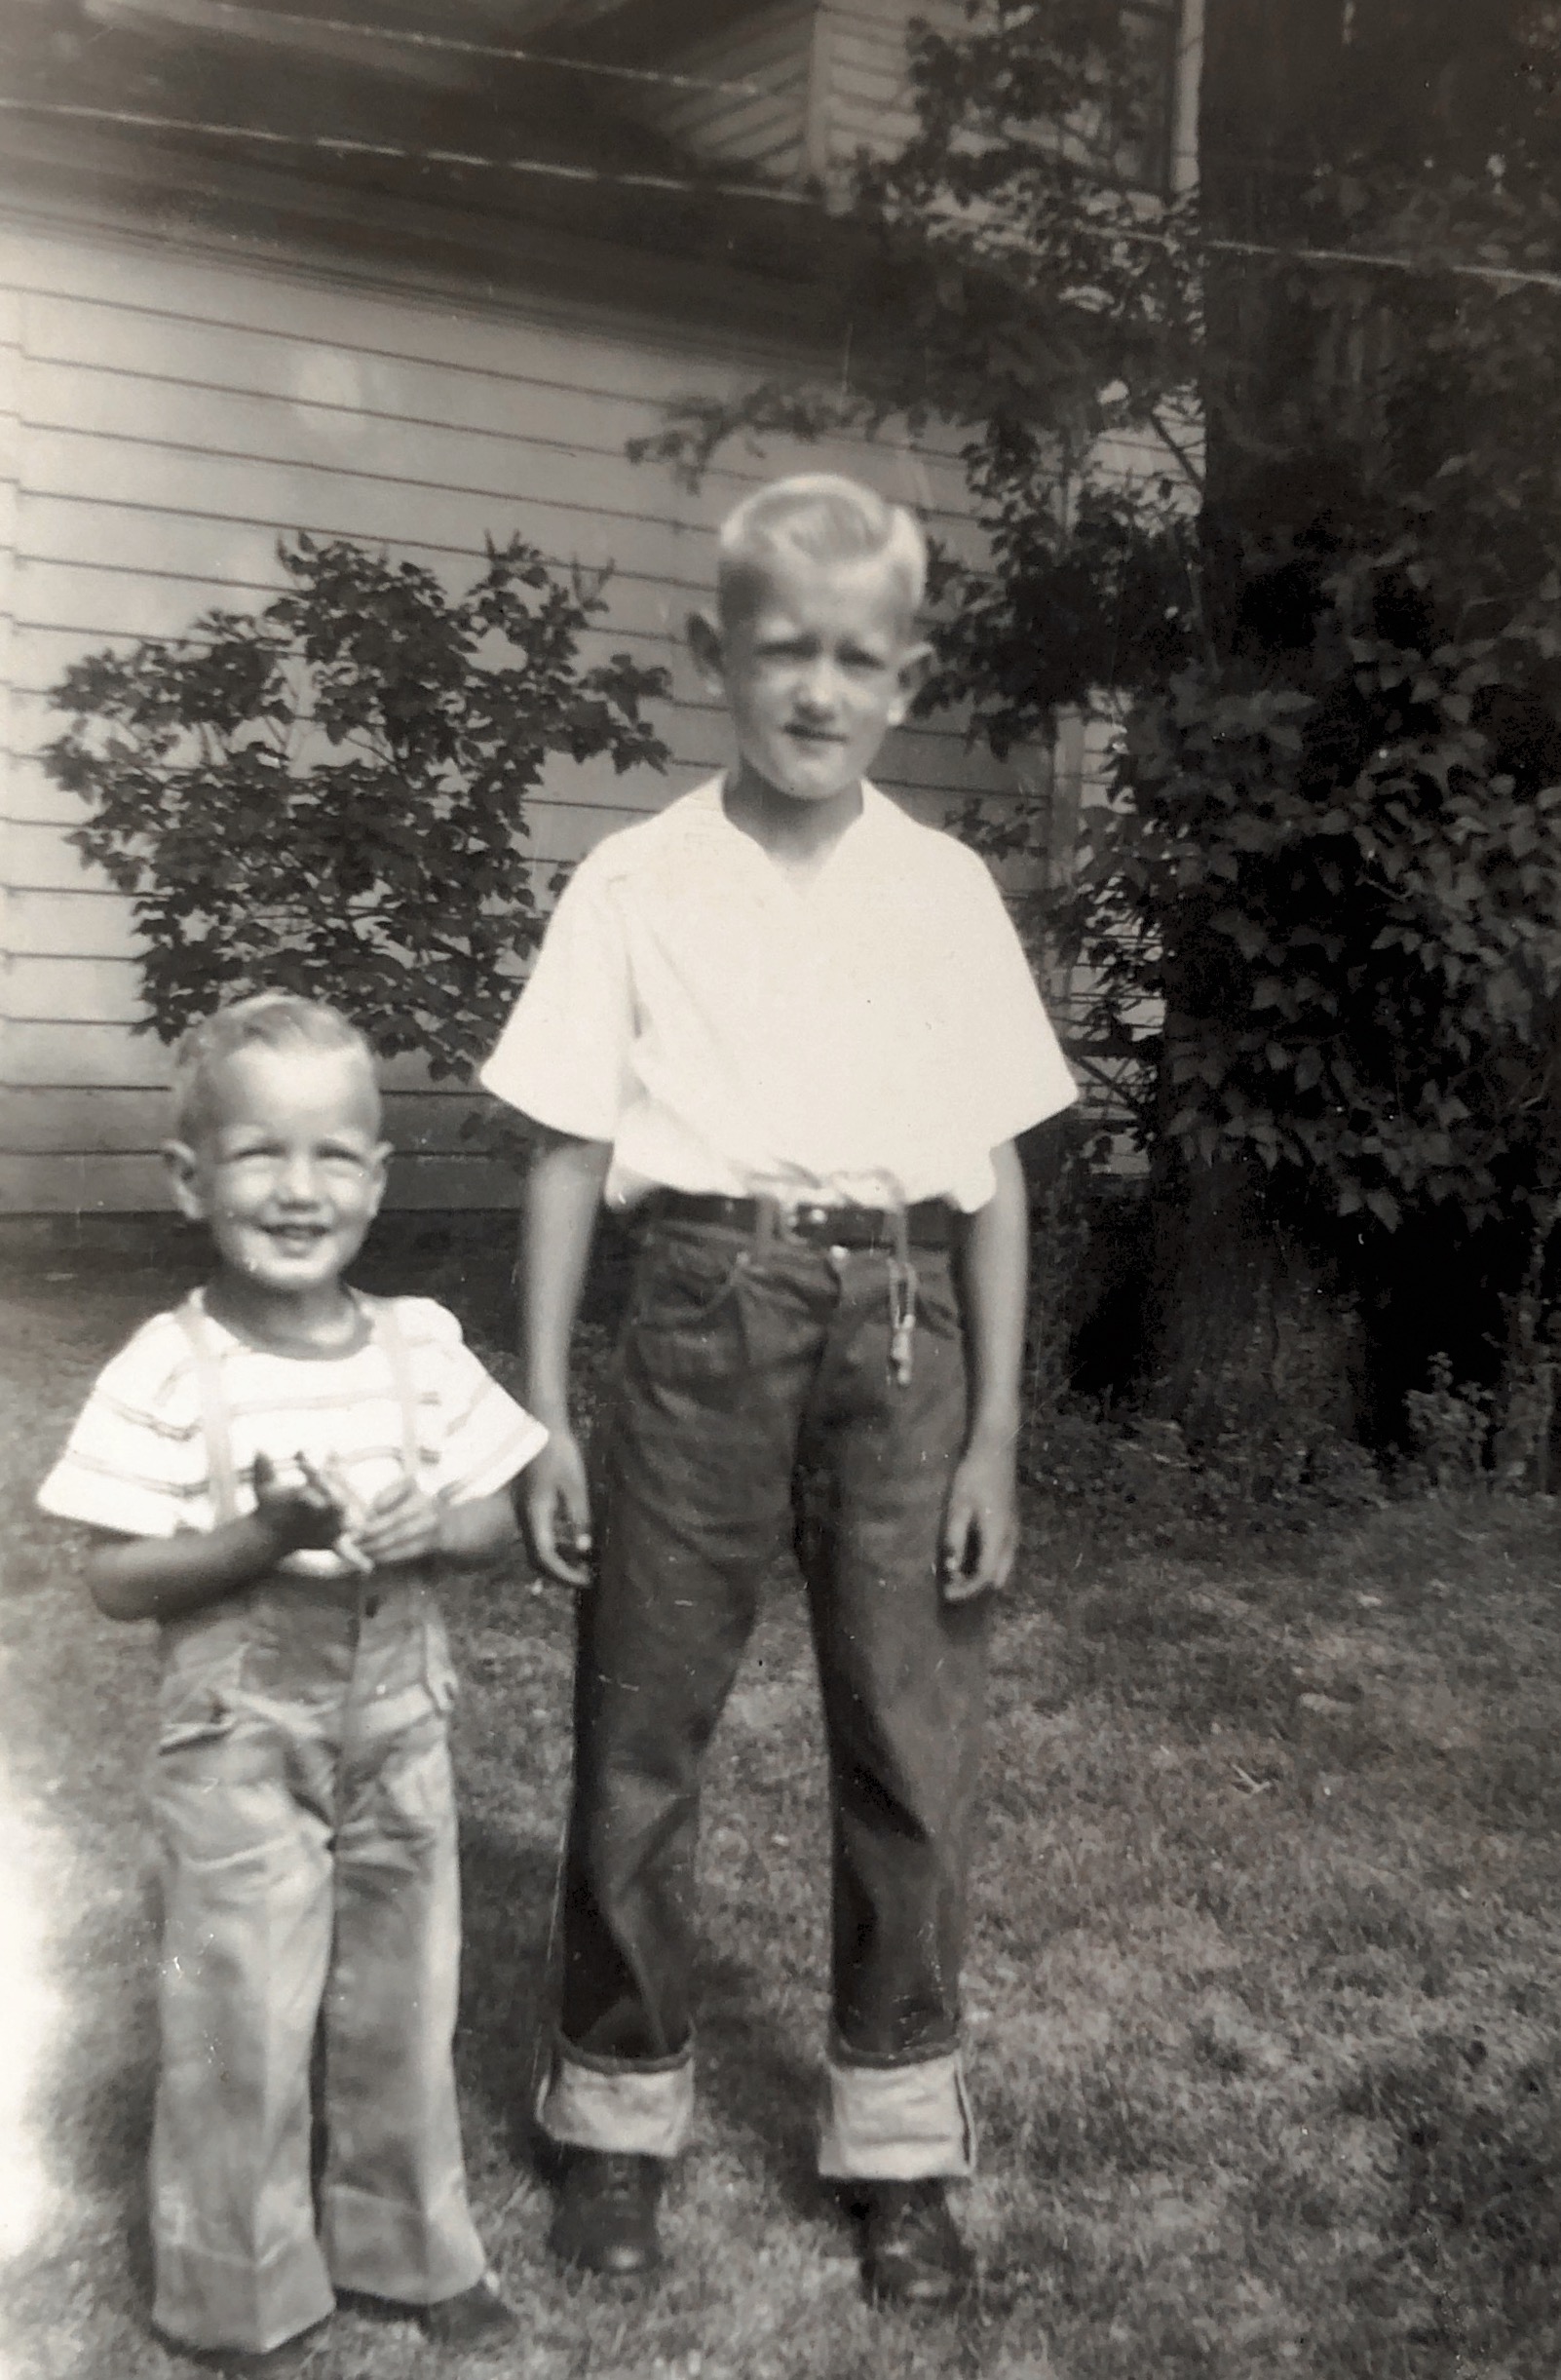 Kent and Dennis Cornaby July 24, 1948